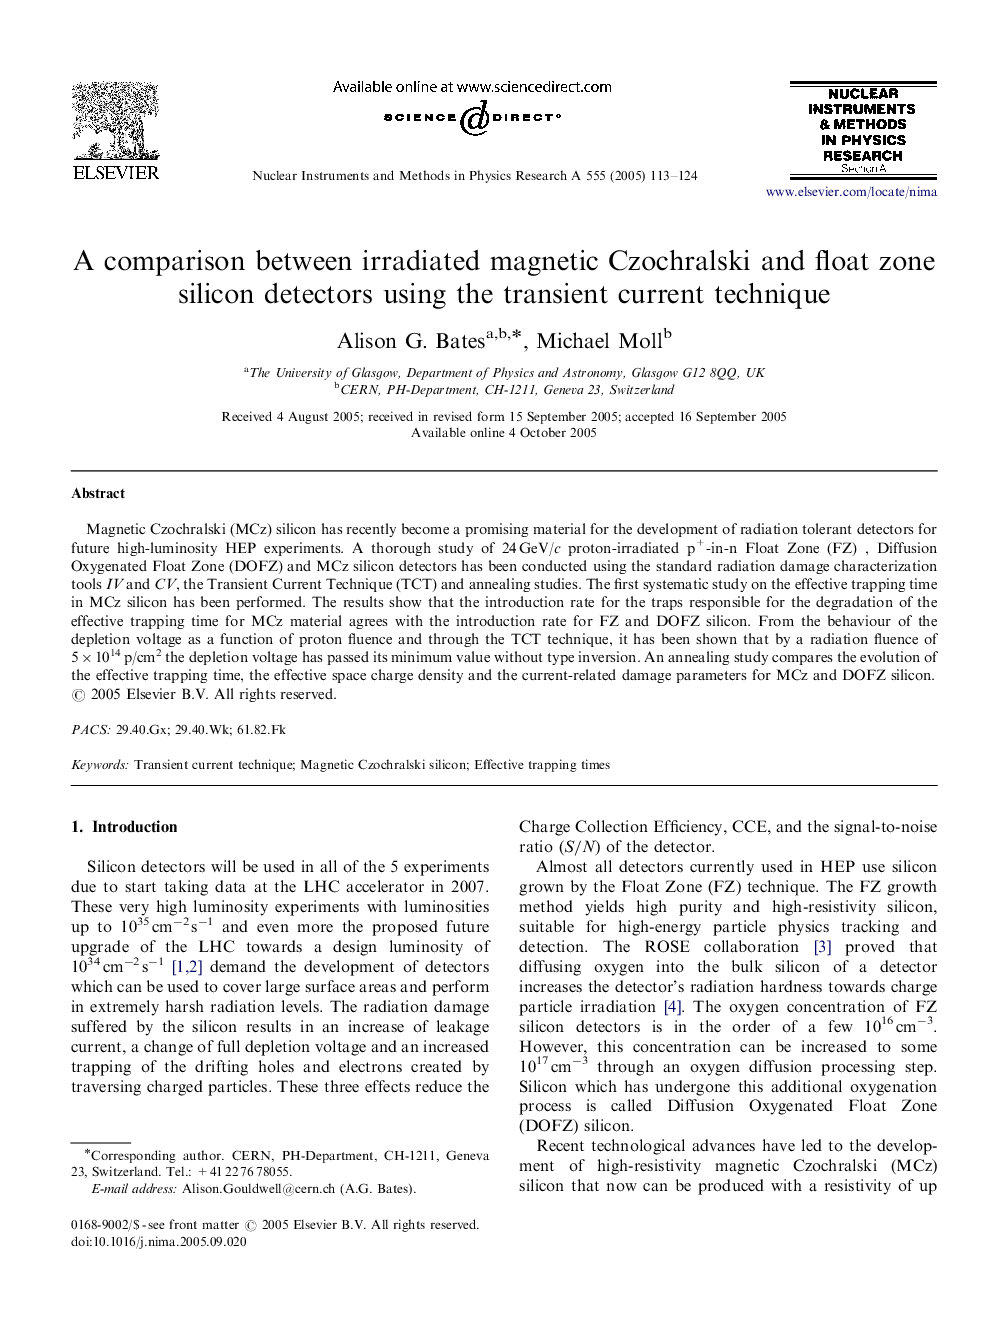 A comparison between irradiated magnetic Czochralski and float zone silicon detectors using the transient current technique